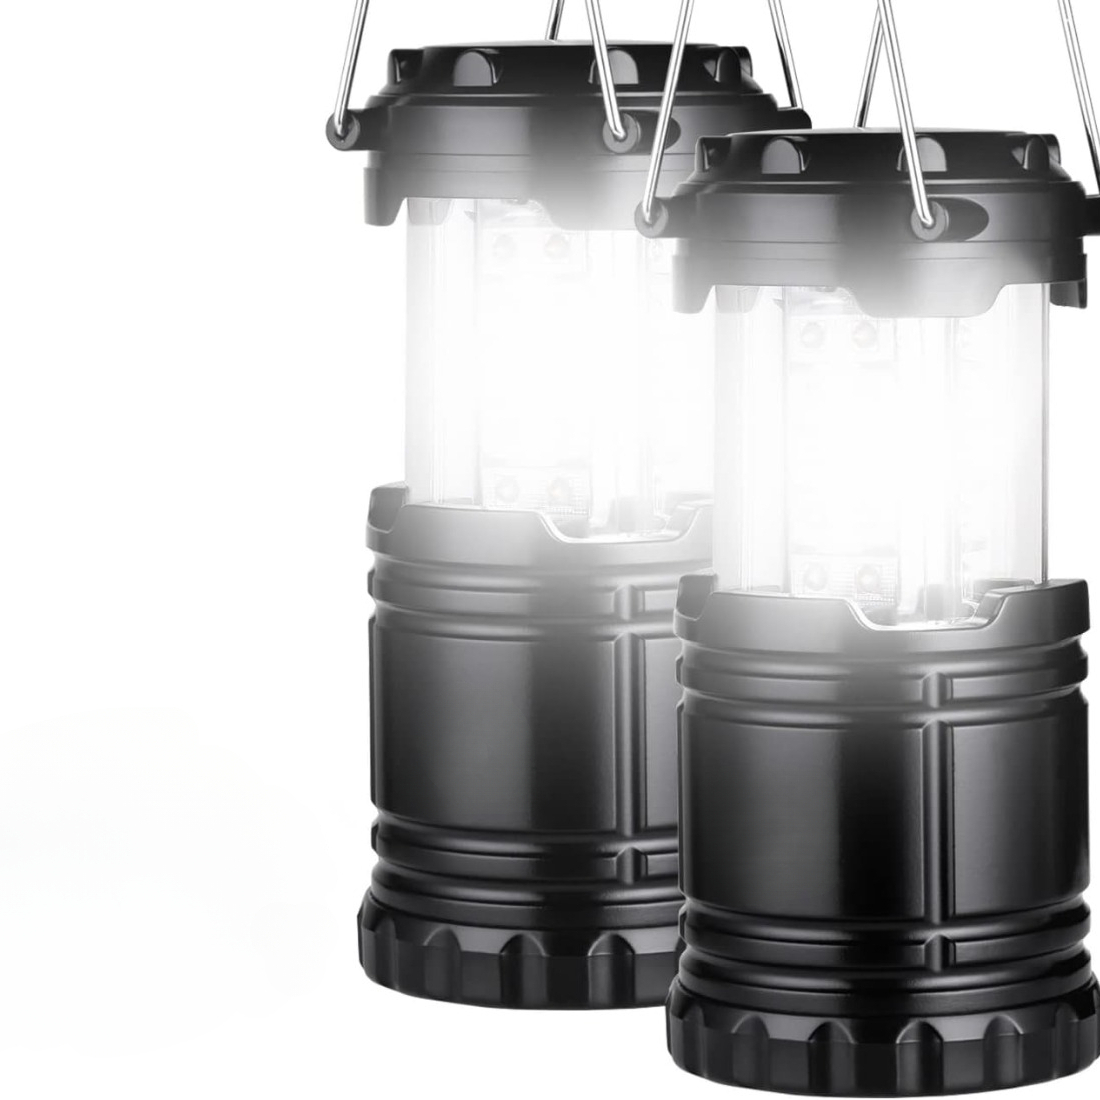 1 Pack LED Camping Lantern, LED Lanterns, Suitable Survival Kits for  Hurricane, Emergency Light for Storm, Outages, Outdoor Portable Lanterns,  Black, Collapsible,Blue 